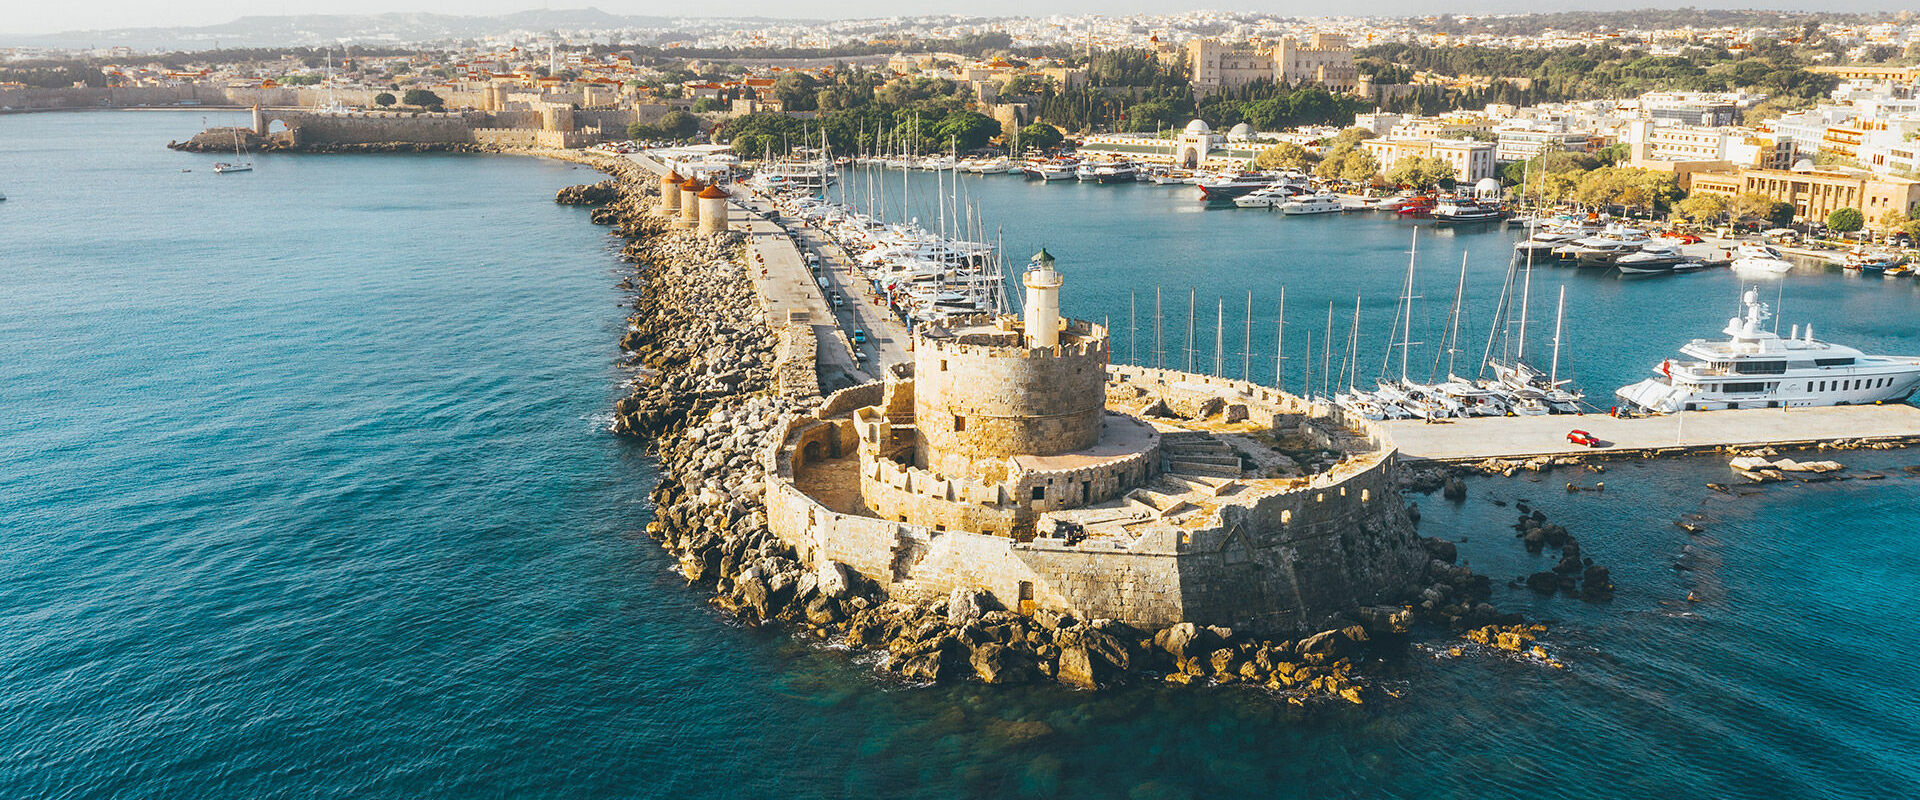 View of Rhodes town from the port